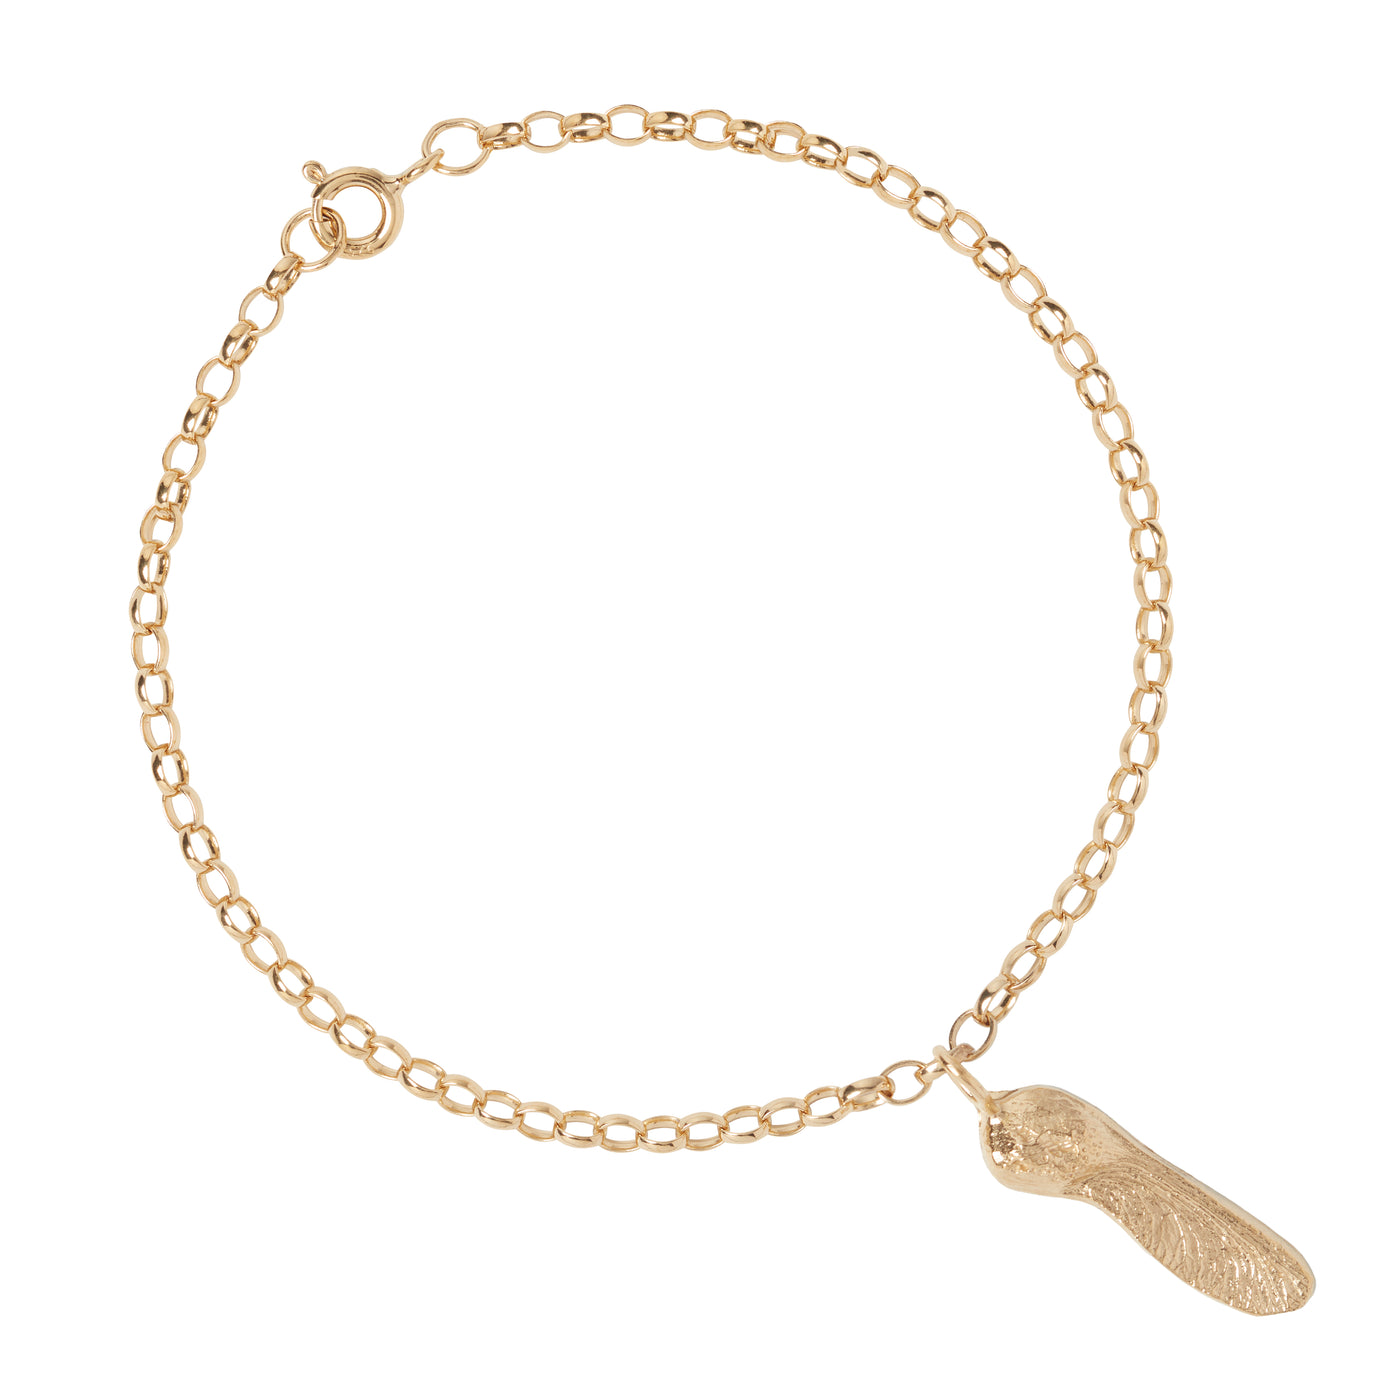 Gold Plated Sycamore Gap Silver Bracelet